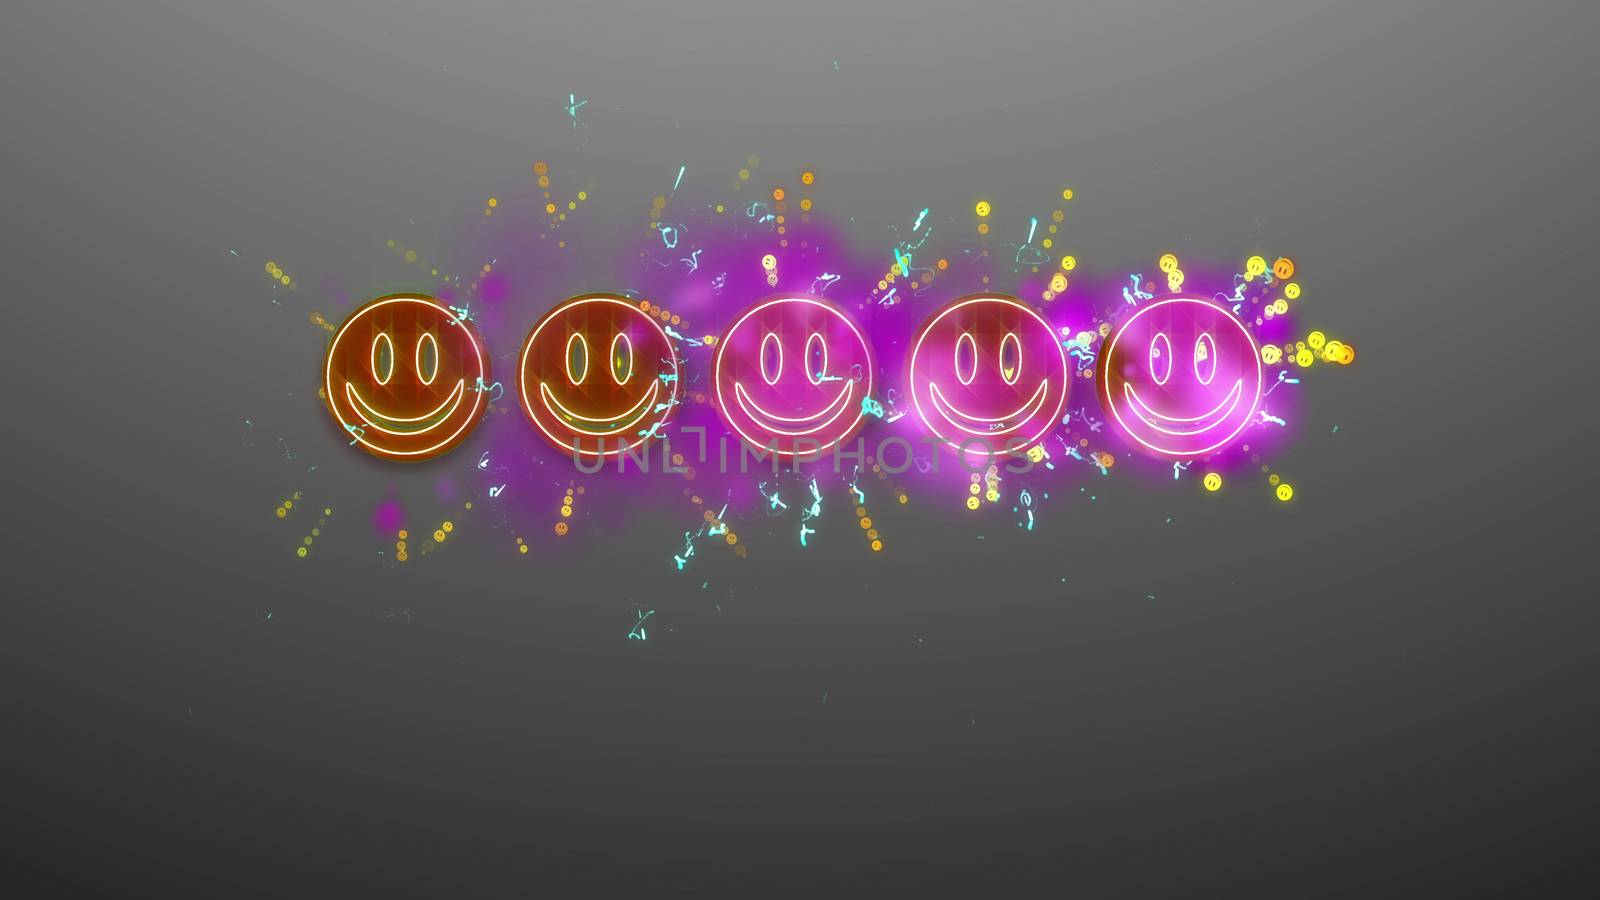 Star rating illustration with violet and emoticons by klss